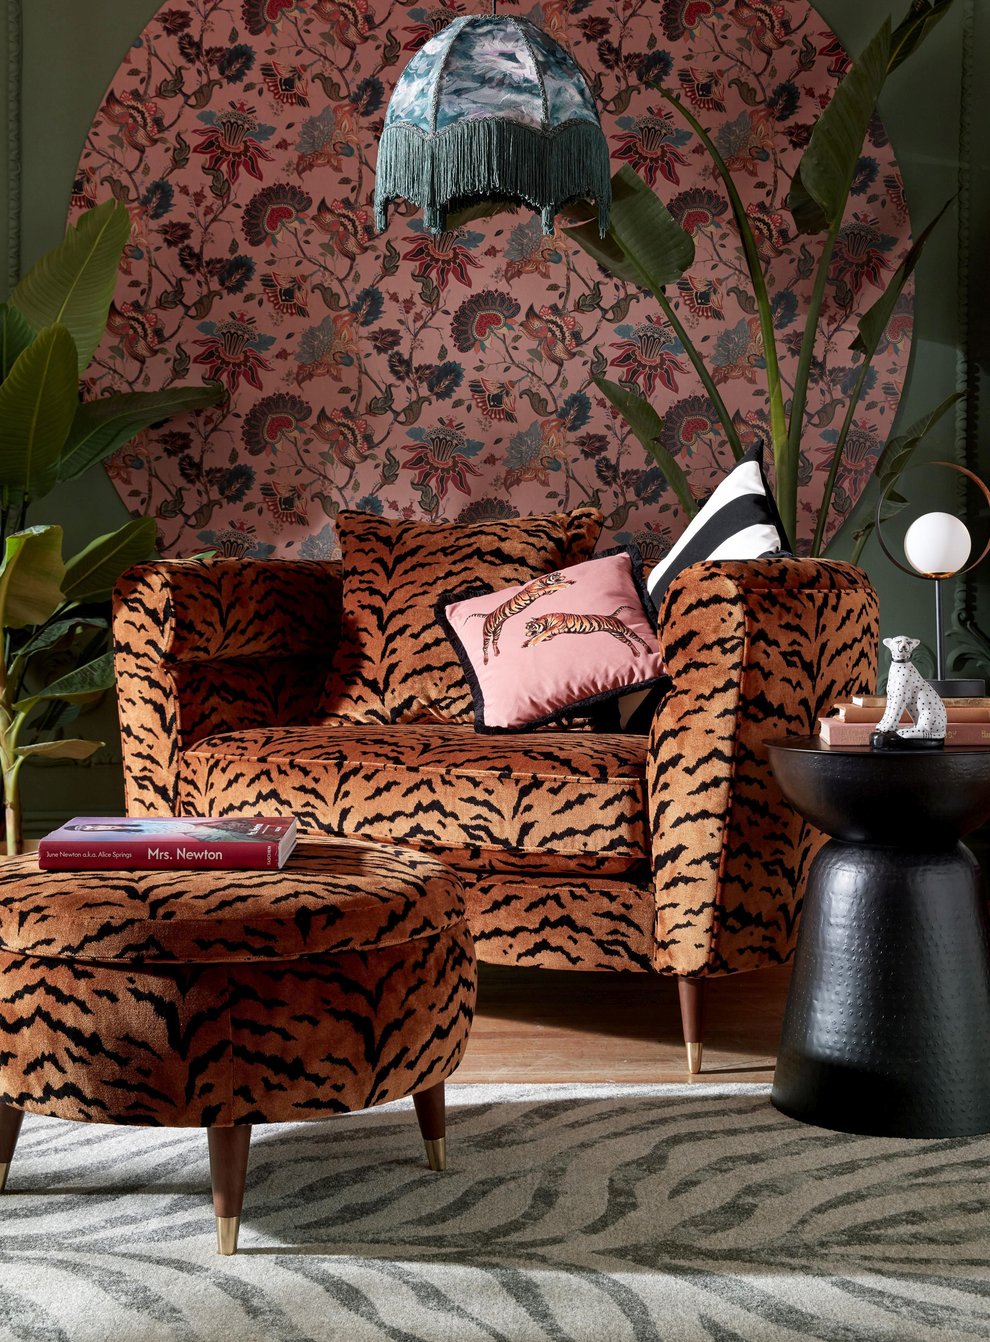 Offbeat Tiger Print All Over Loveseat and Storage Foot Stool from Sofology (Sofology/PA)